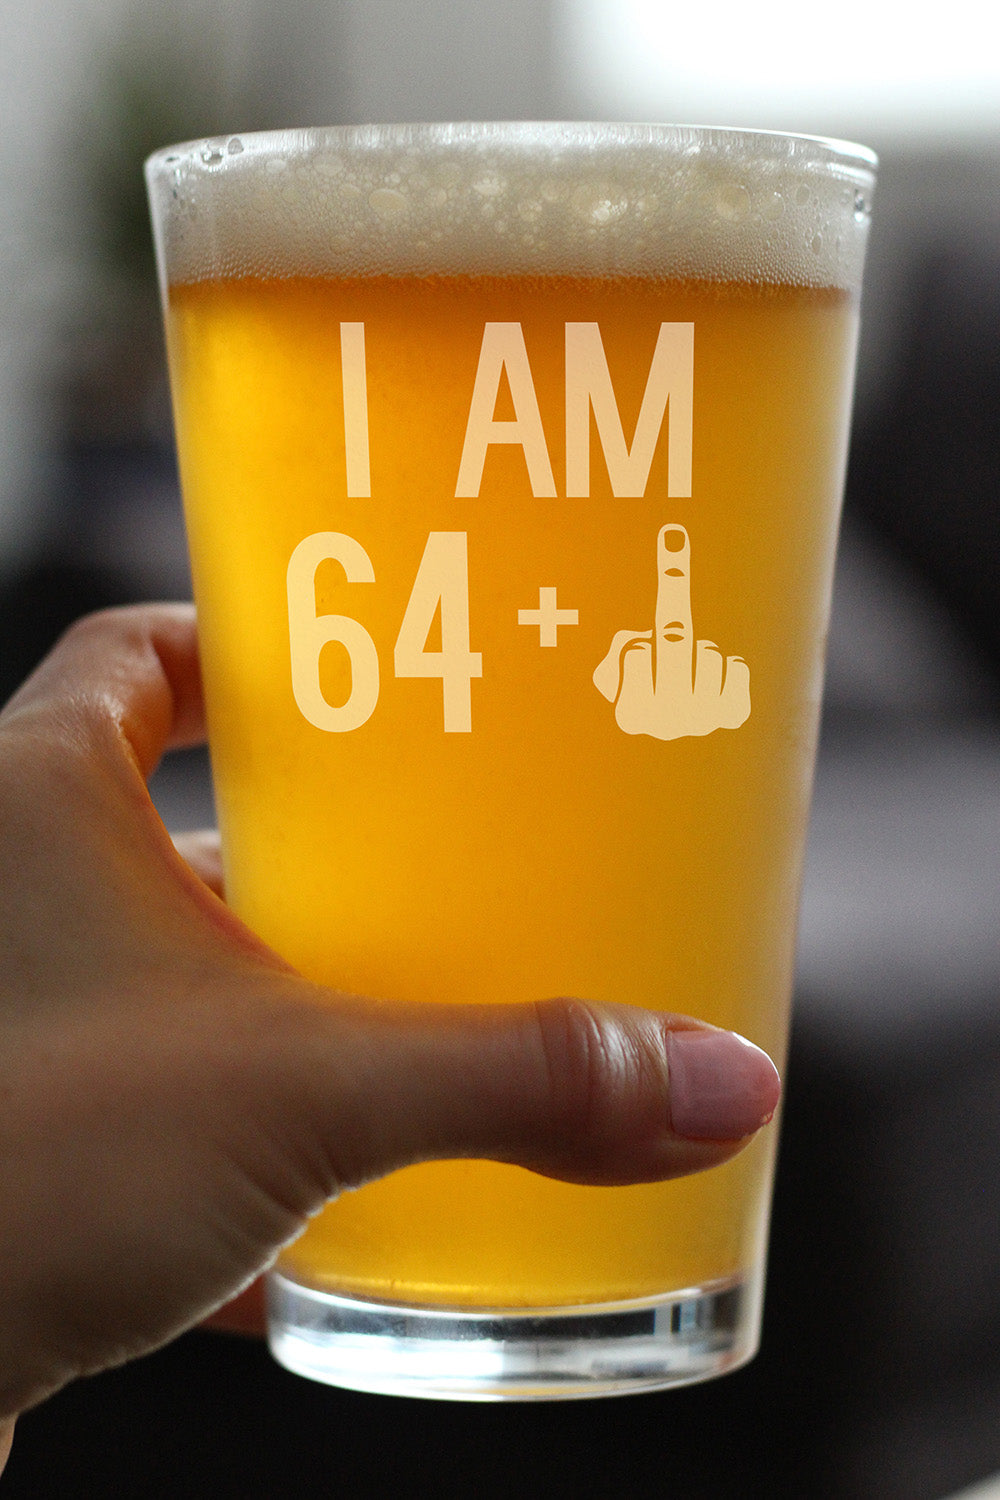 64 + 1 Middle Finger - 16 oz Pint Glass for Beer - Funny 65th Birthday Gifts for Men Turning 65